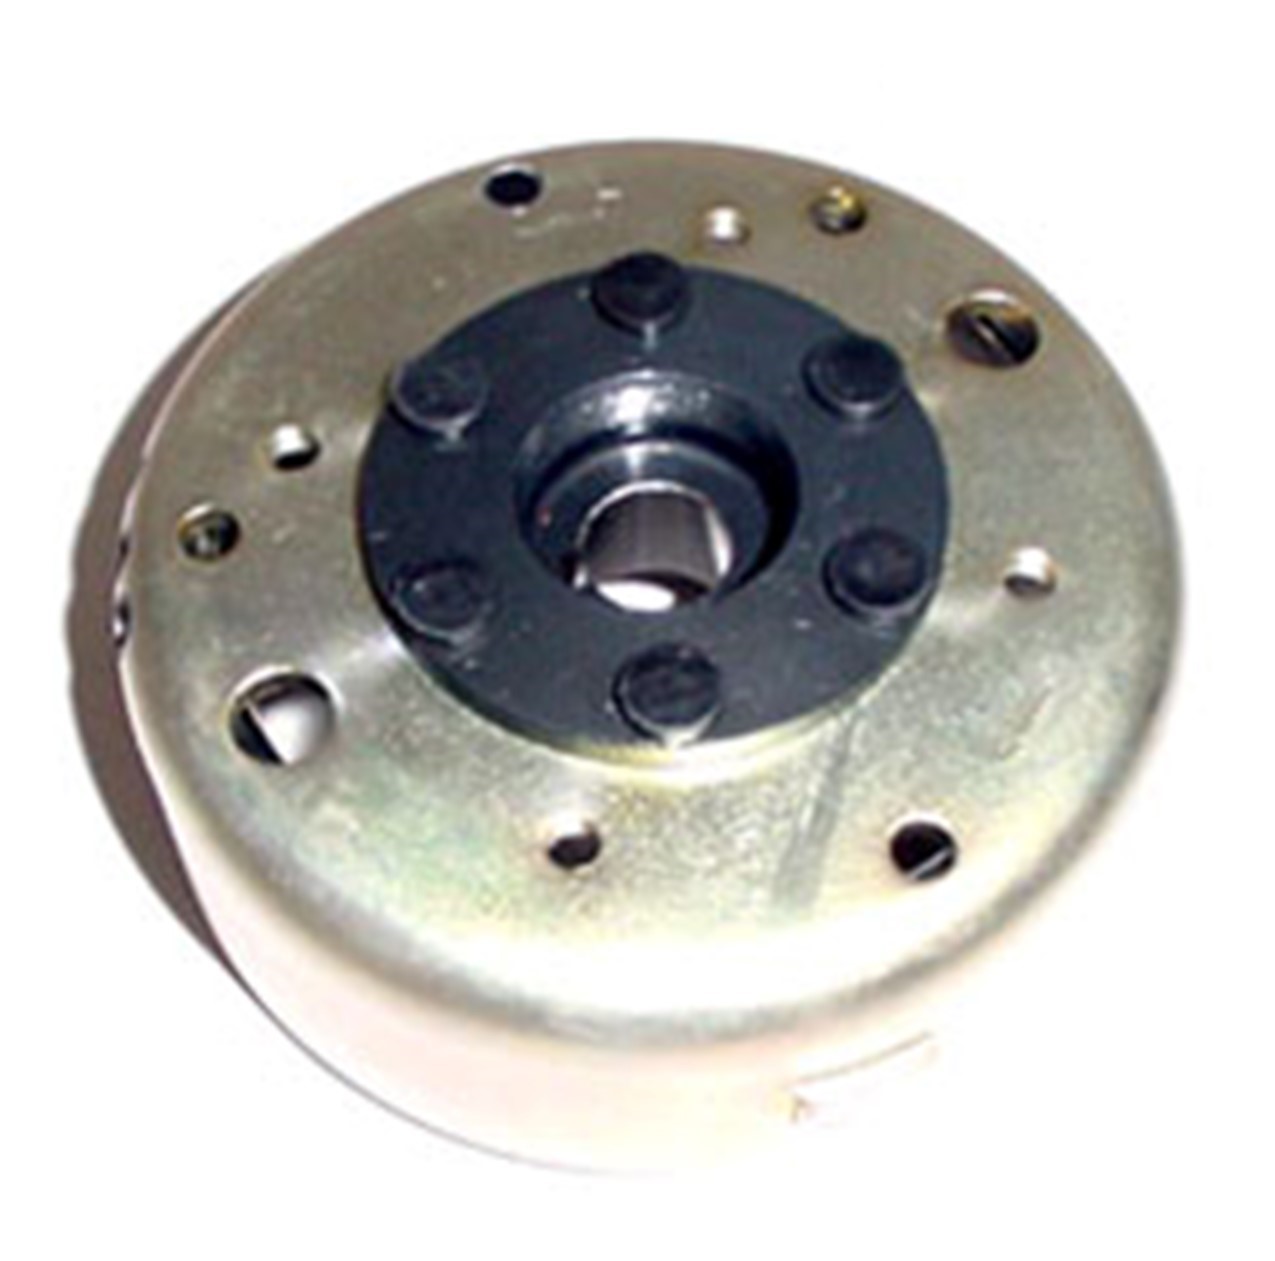 Flywheel Fits E-Ton Yukon YXL150, CXL150, Viper RXL150R, ATVs, Beamer R4-150, Matrix 150 Scooters + Others + More ID= 90mm, Hgt=40mm Shaft (closed side)=15.2, Shaft (open side)=18mm Use Puller# 634192